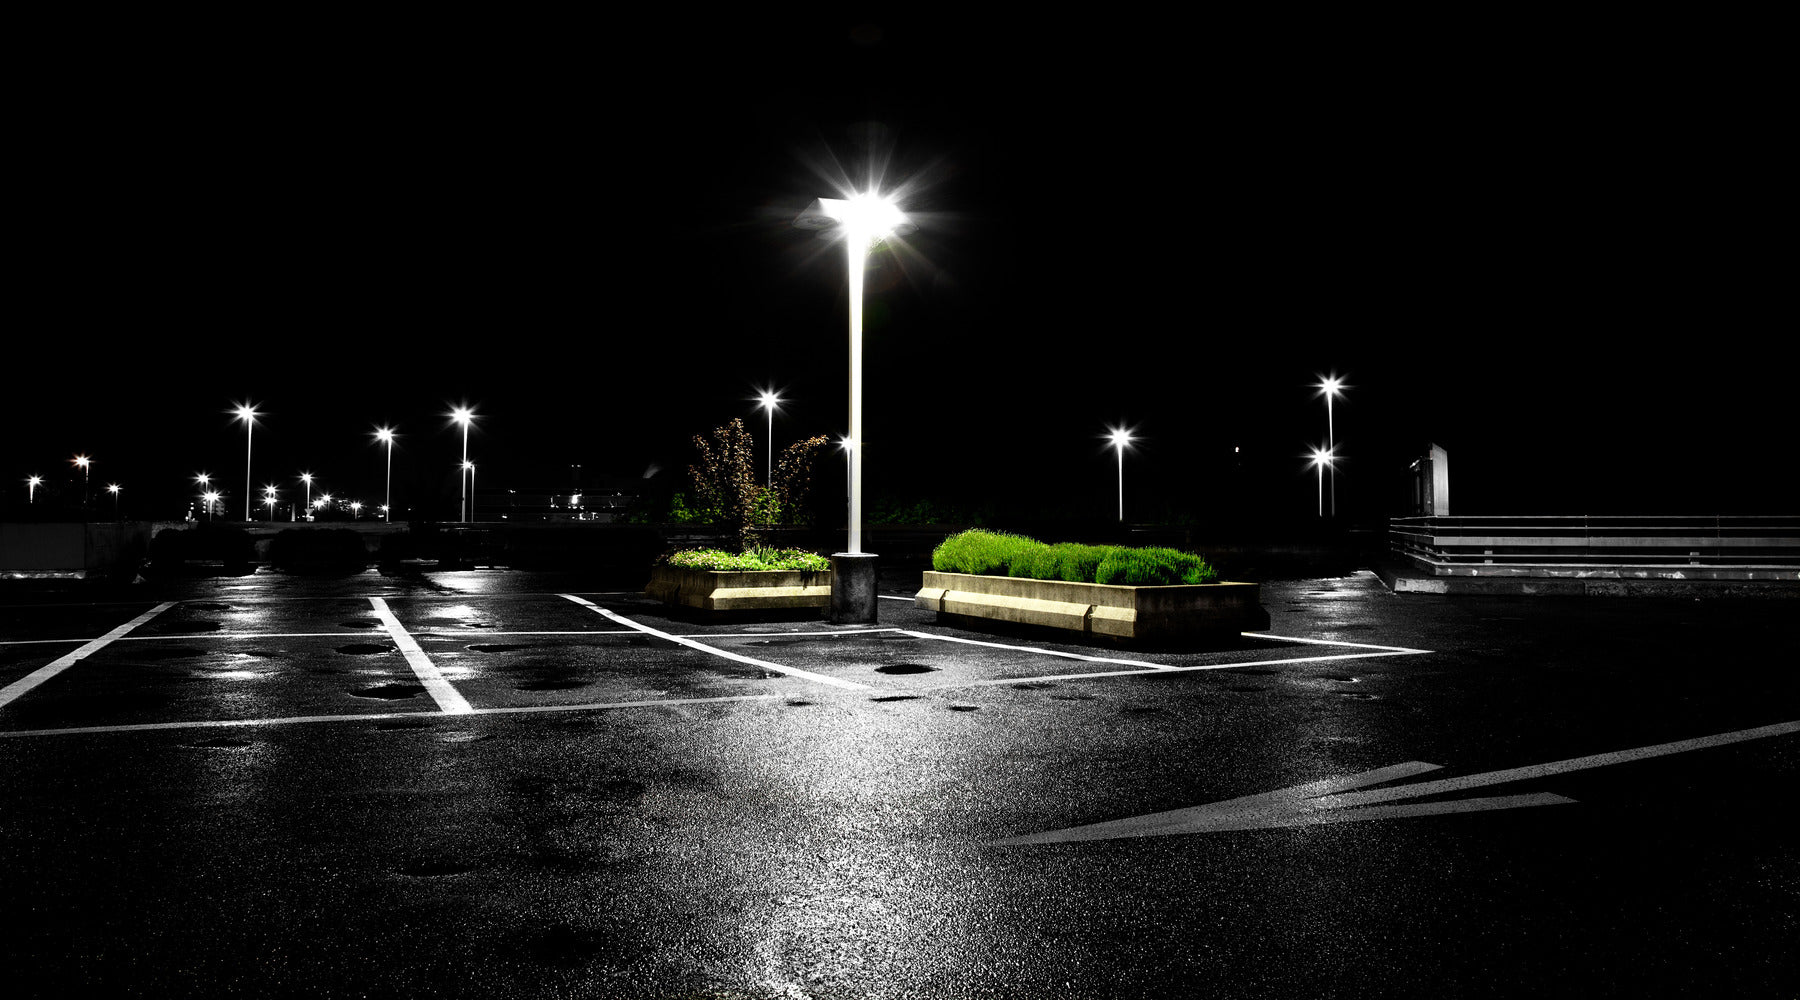 Empty parking lot shown at nighttime with parking lot lighting illuminating the entire area